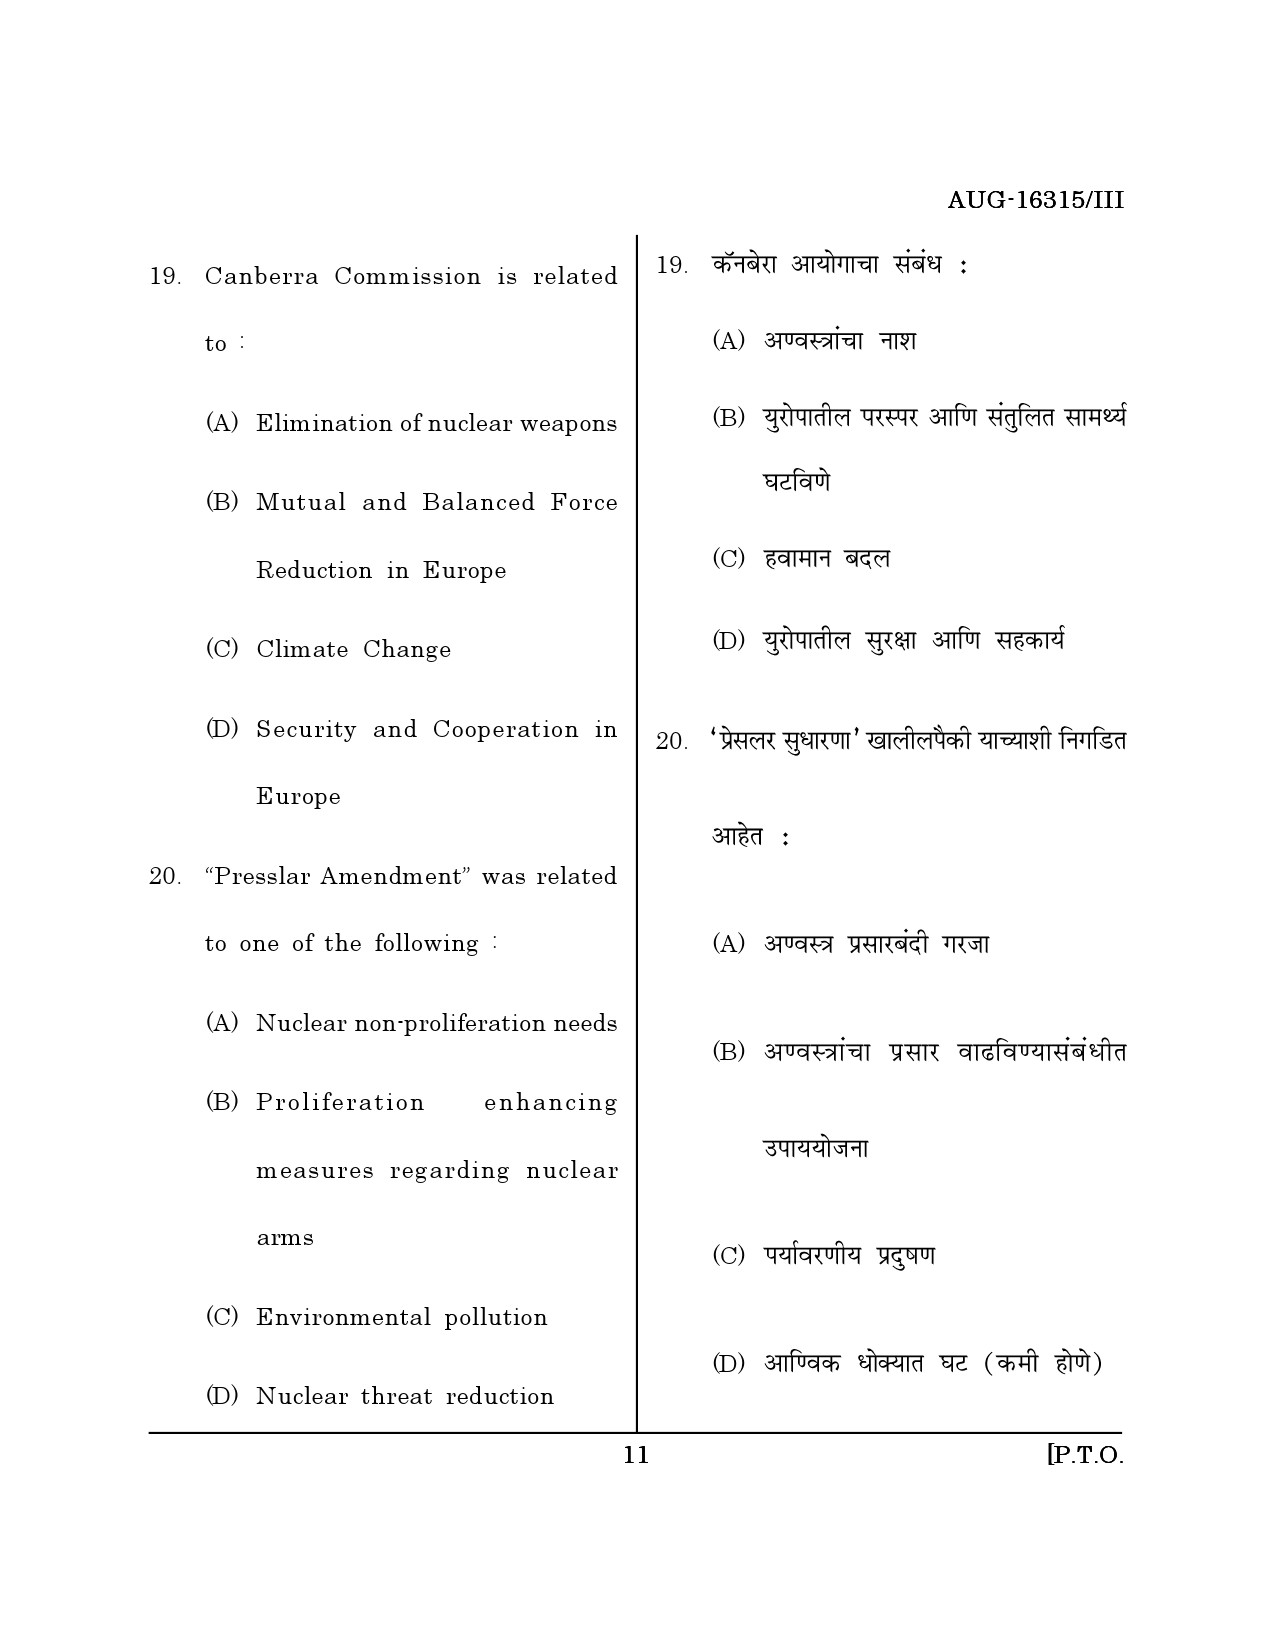 Maharashtra SET Defence and Strategic Studies Question Paper III August 2015 10